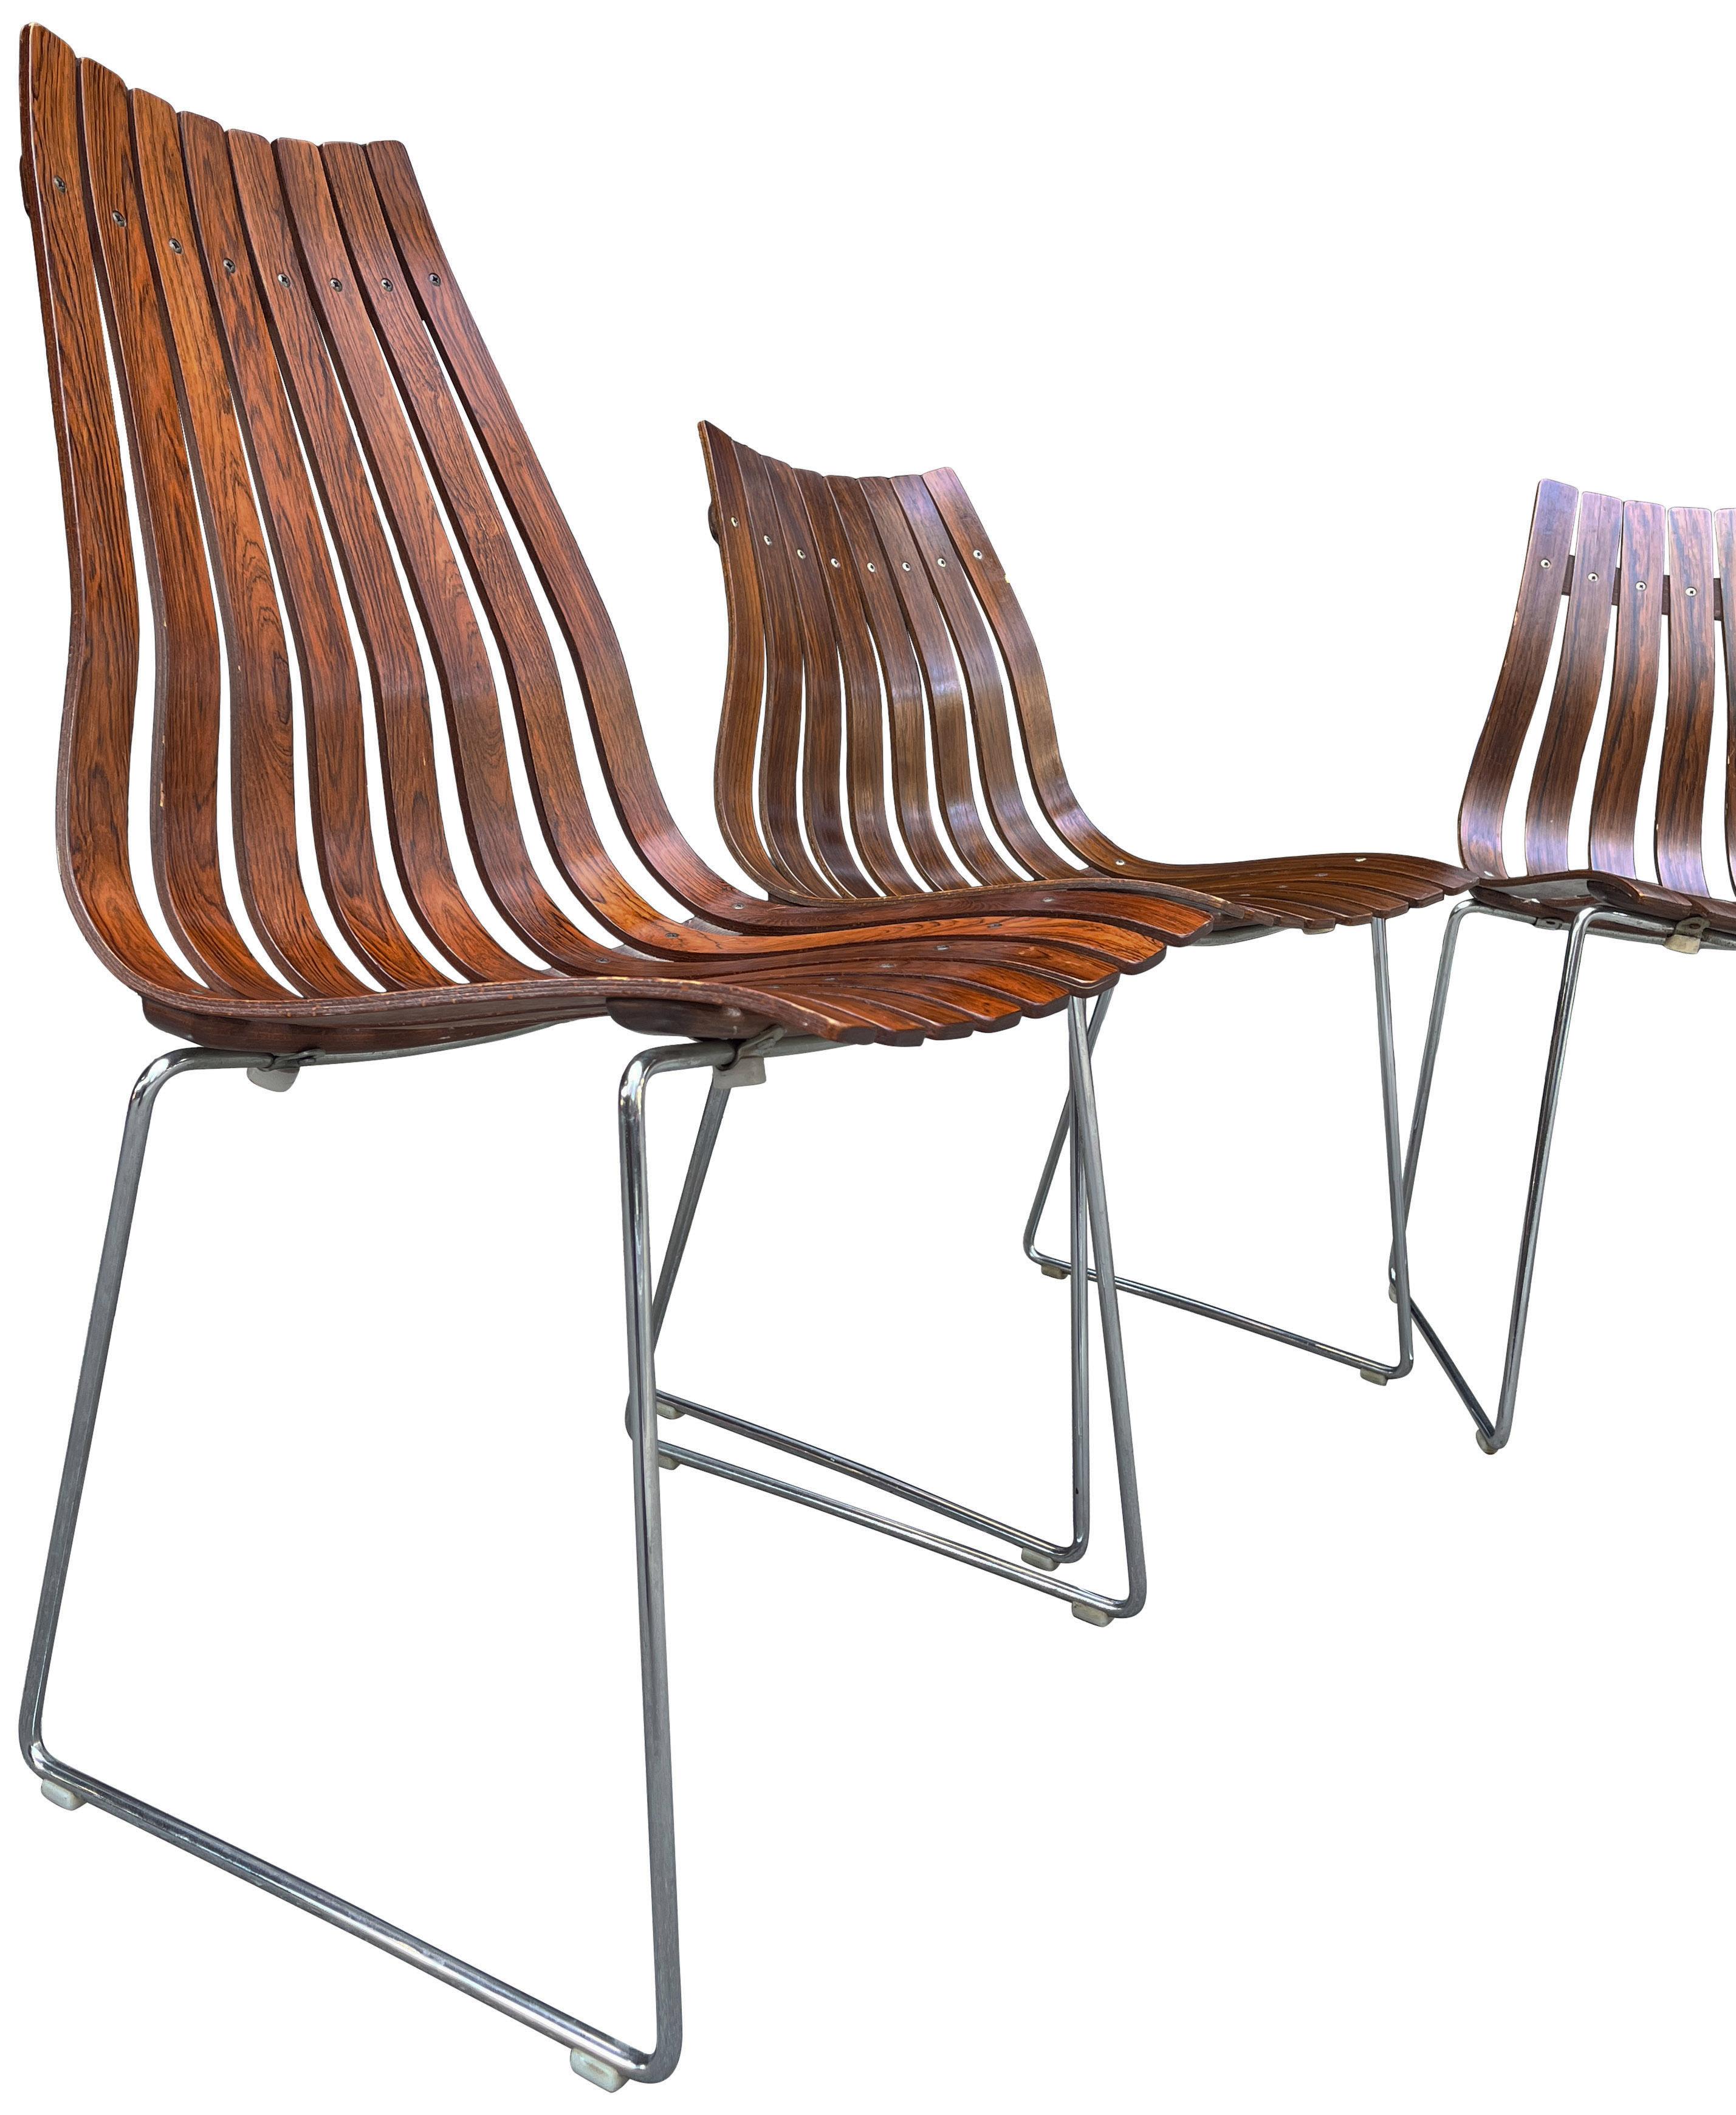 Norwegian Midcentury Scandia Chairs by Hans Brattrud for Hove Mobler For Sale